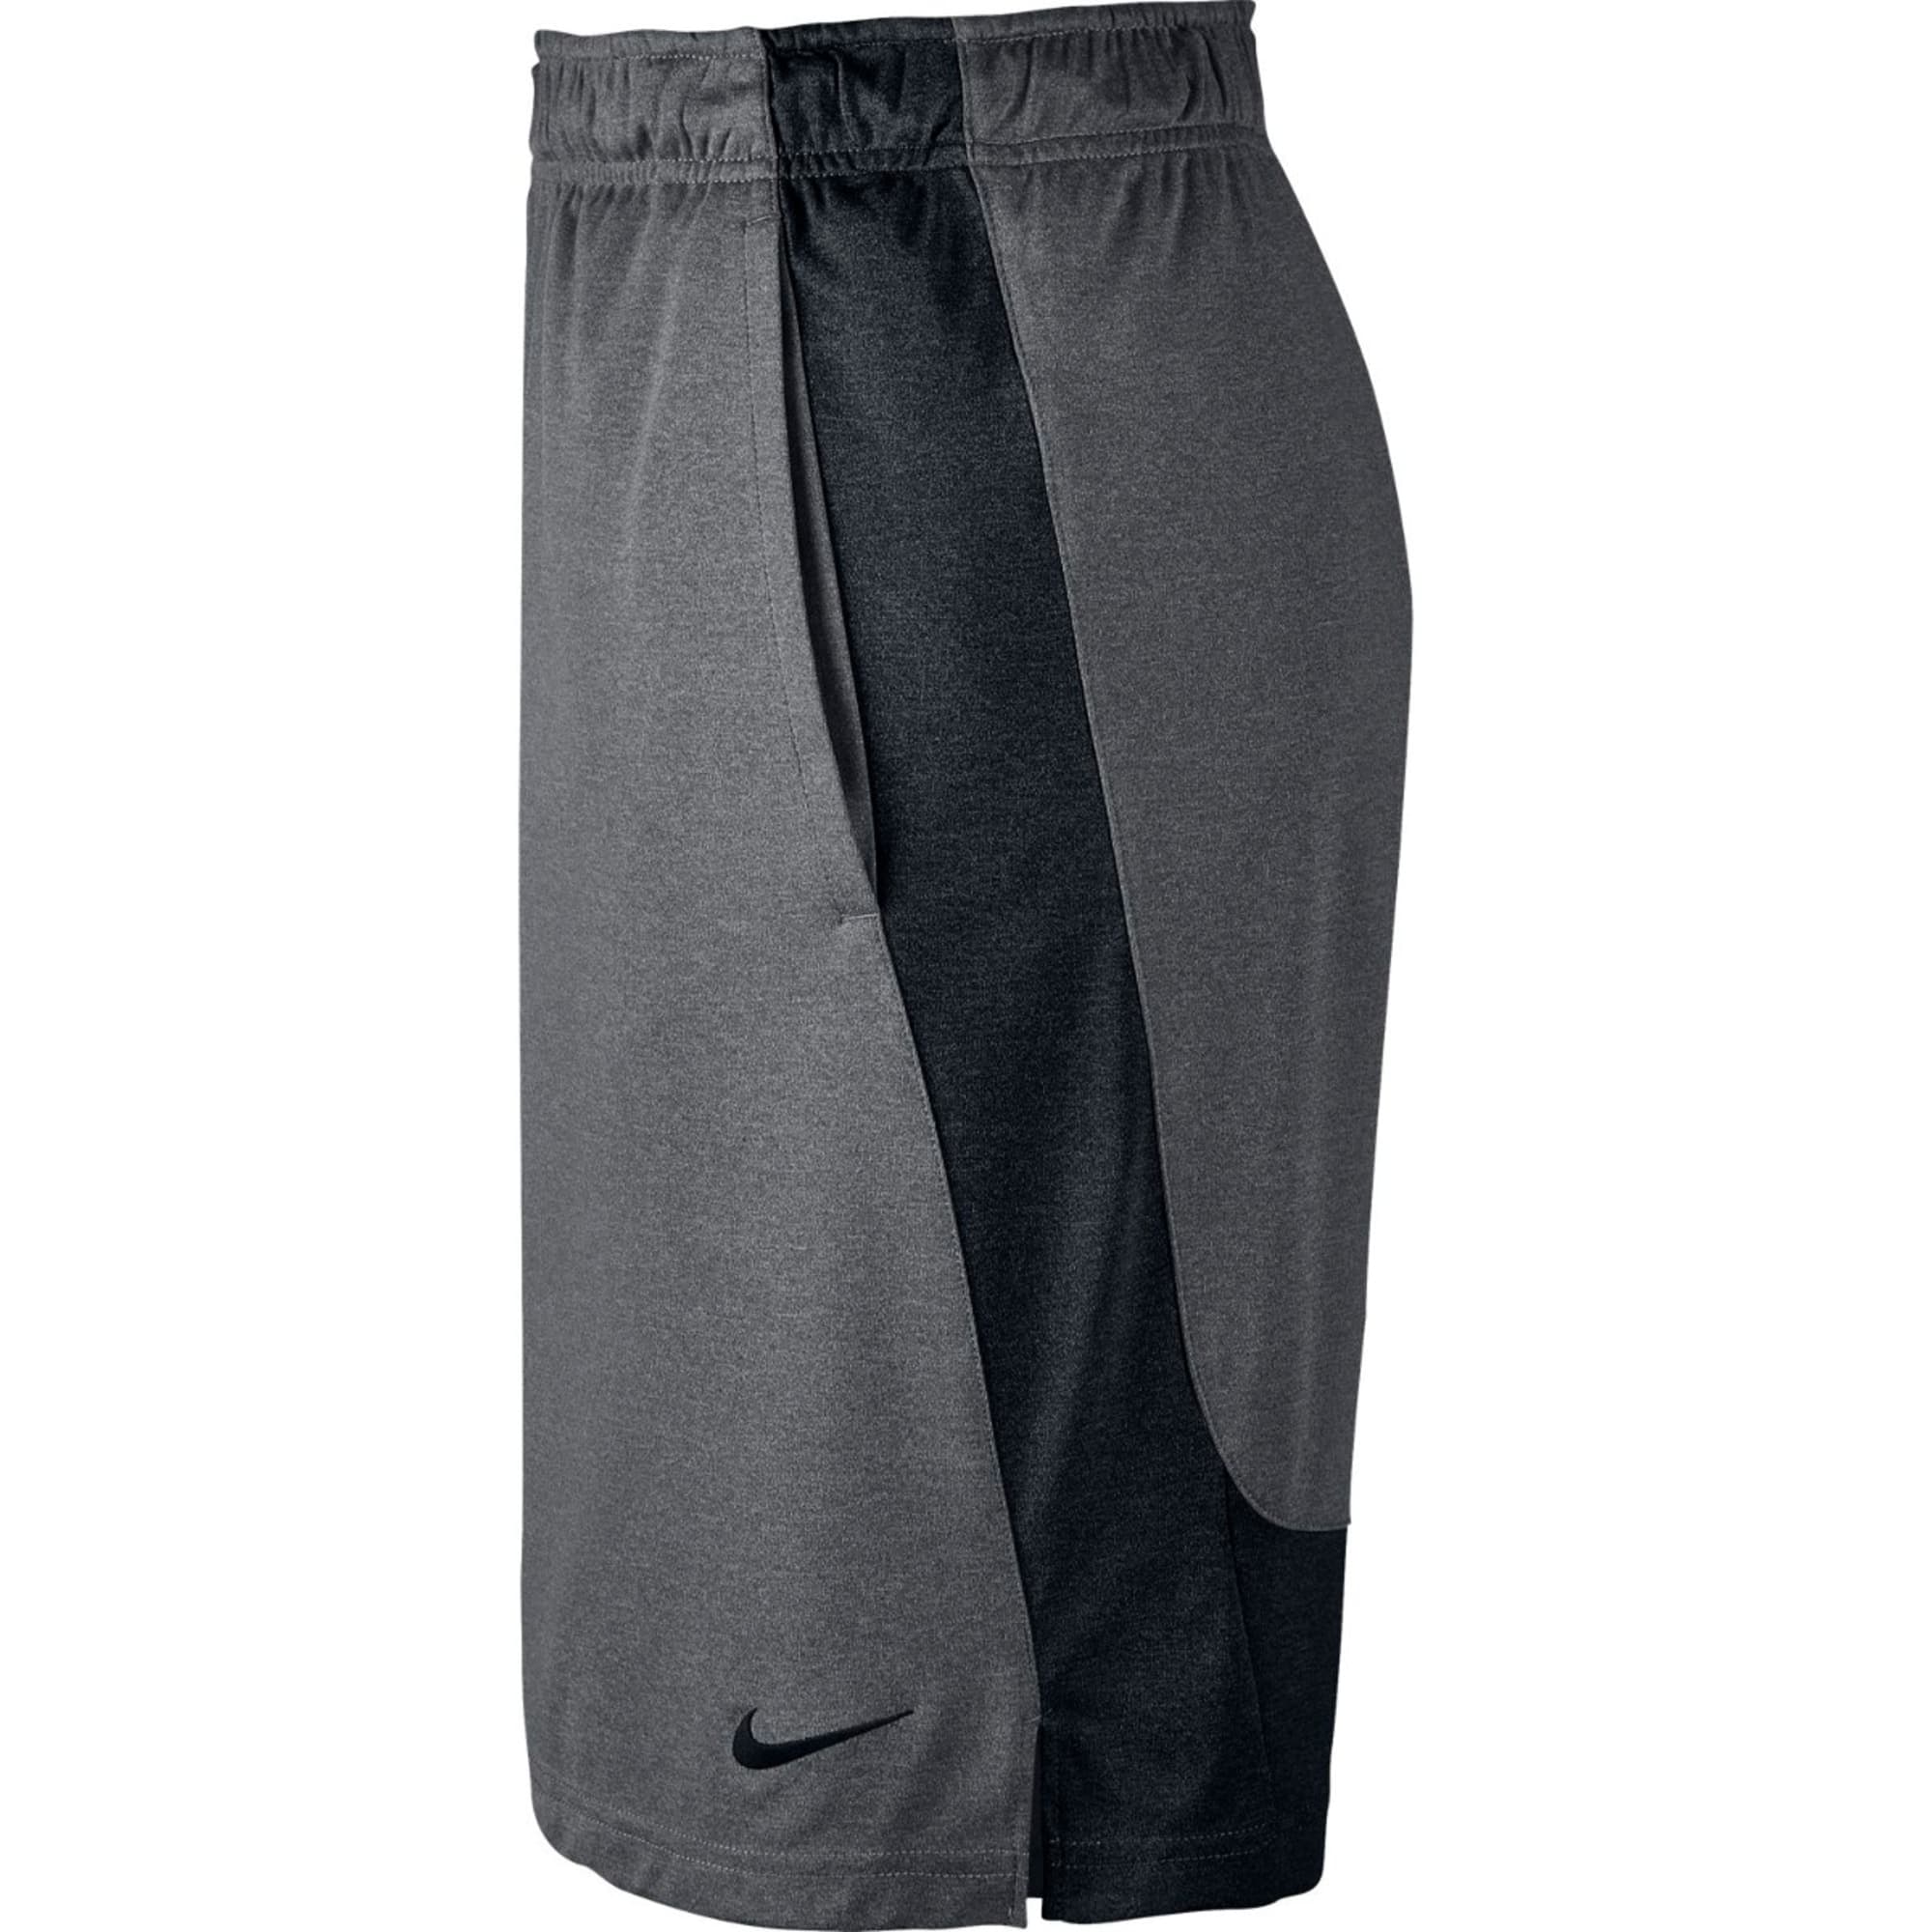  Nike Men's Dry Training Shorts, Anthracite/Anthracite